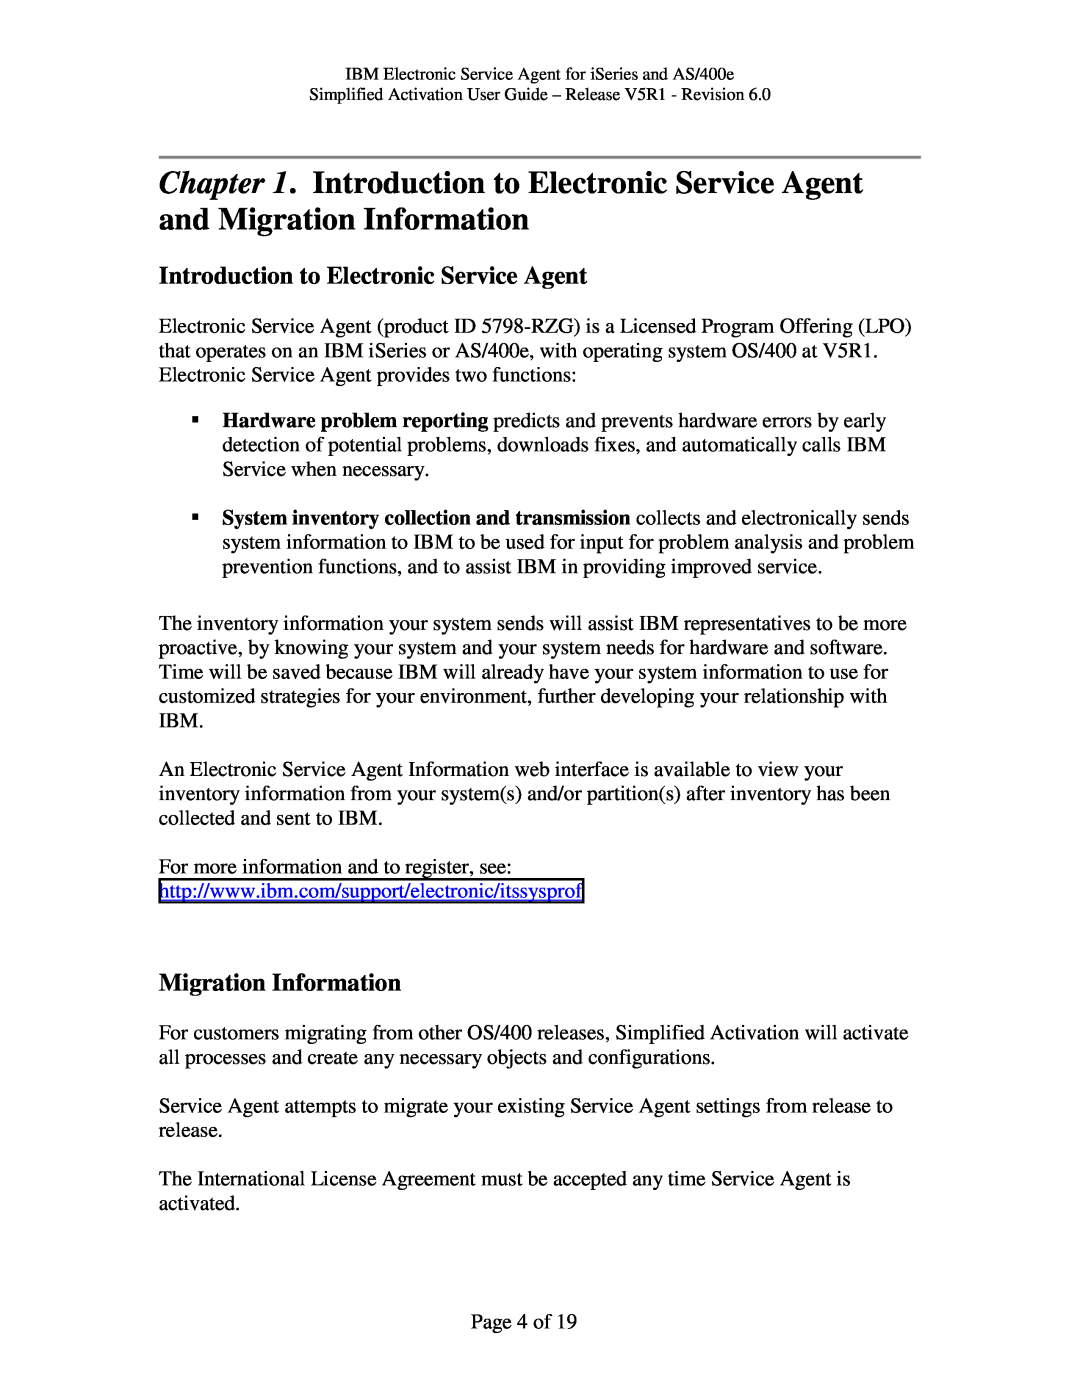 IBM V5R1, iSeries, PTF SF67624 manual Introduction to Electronic Service Agent, Migration Information 